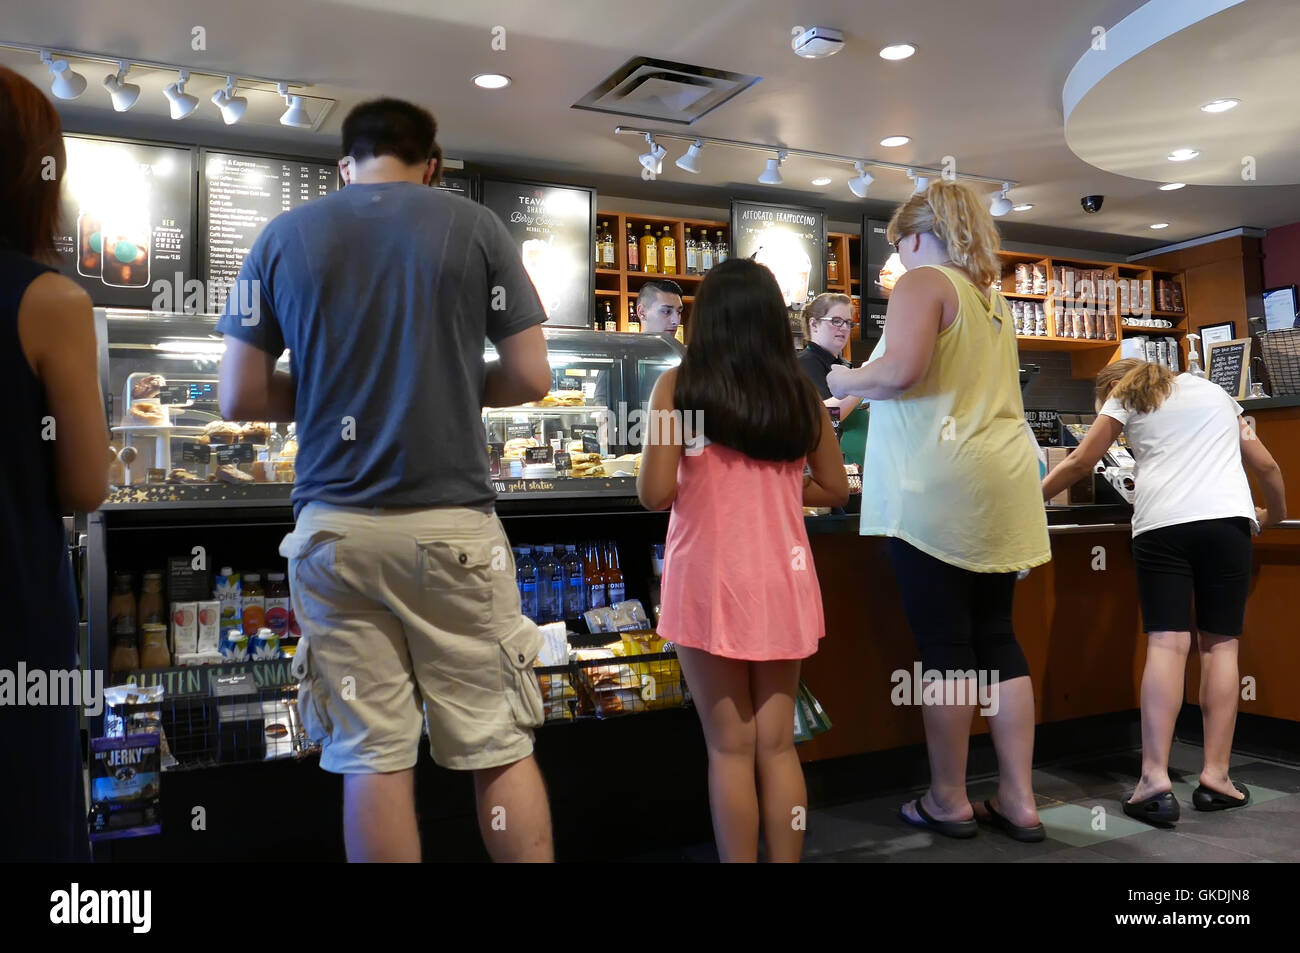 One side of people line up for buying coffee inside Starbucks store Stock Photo